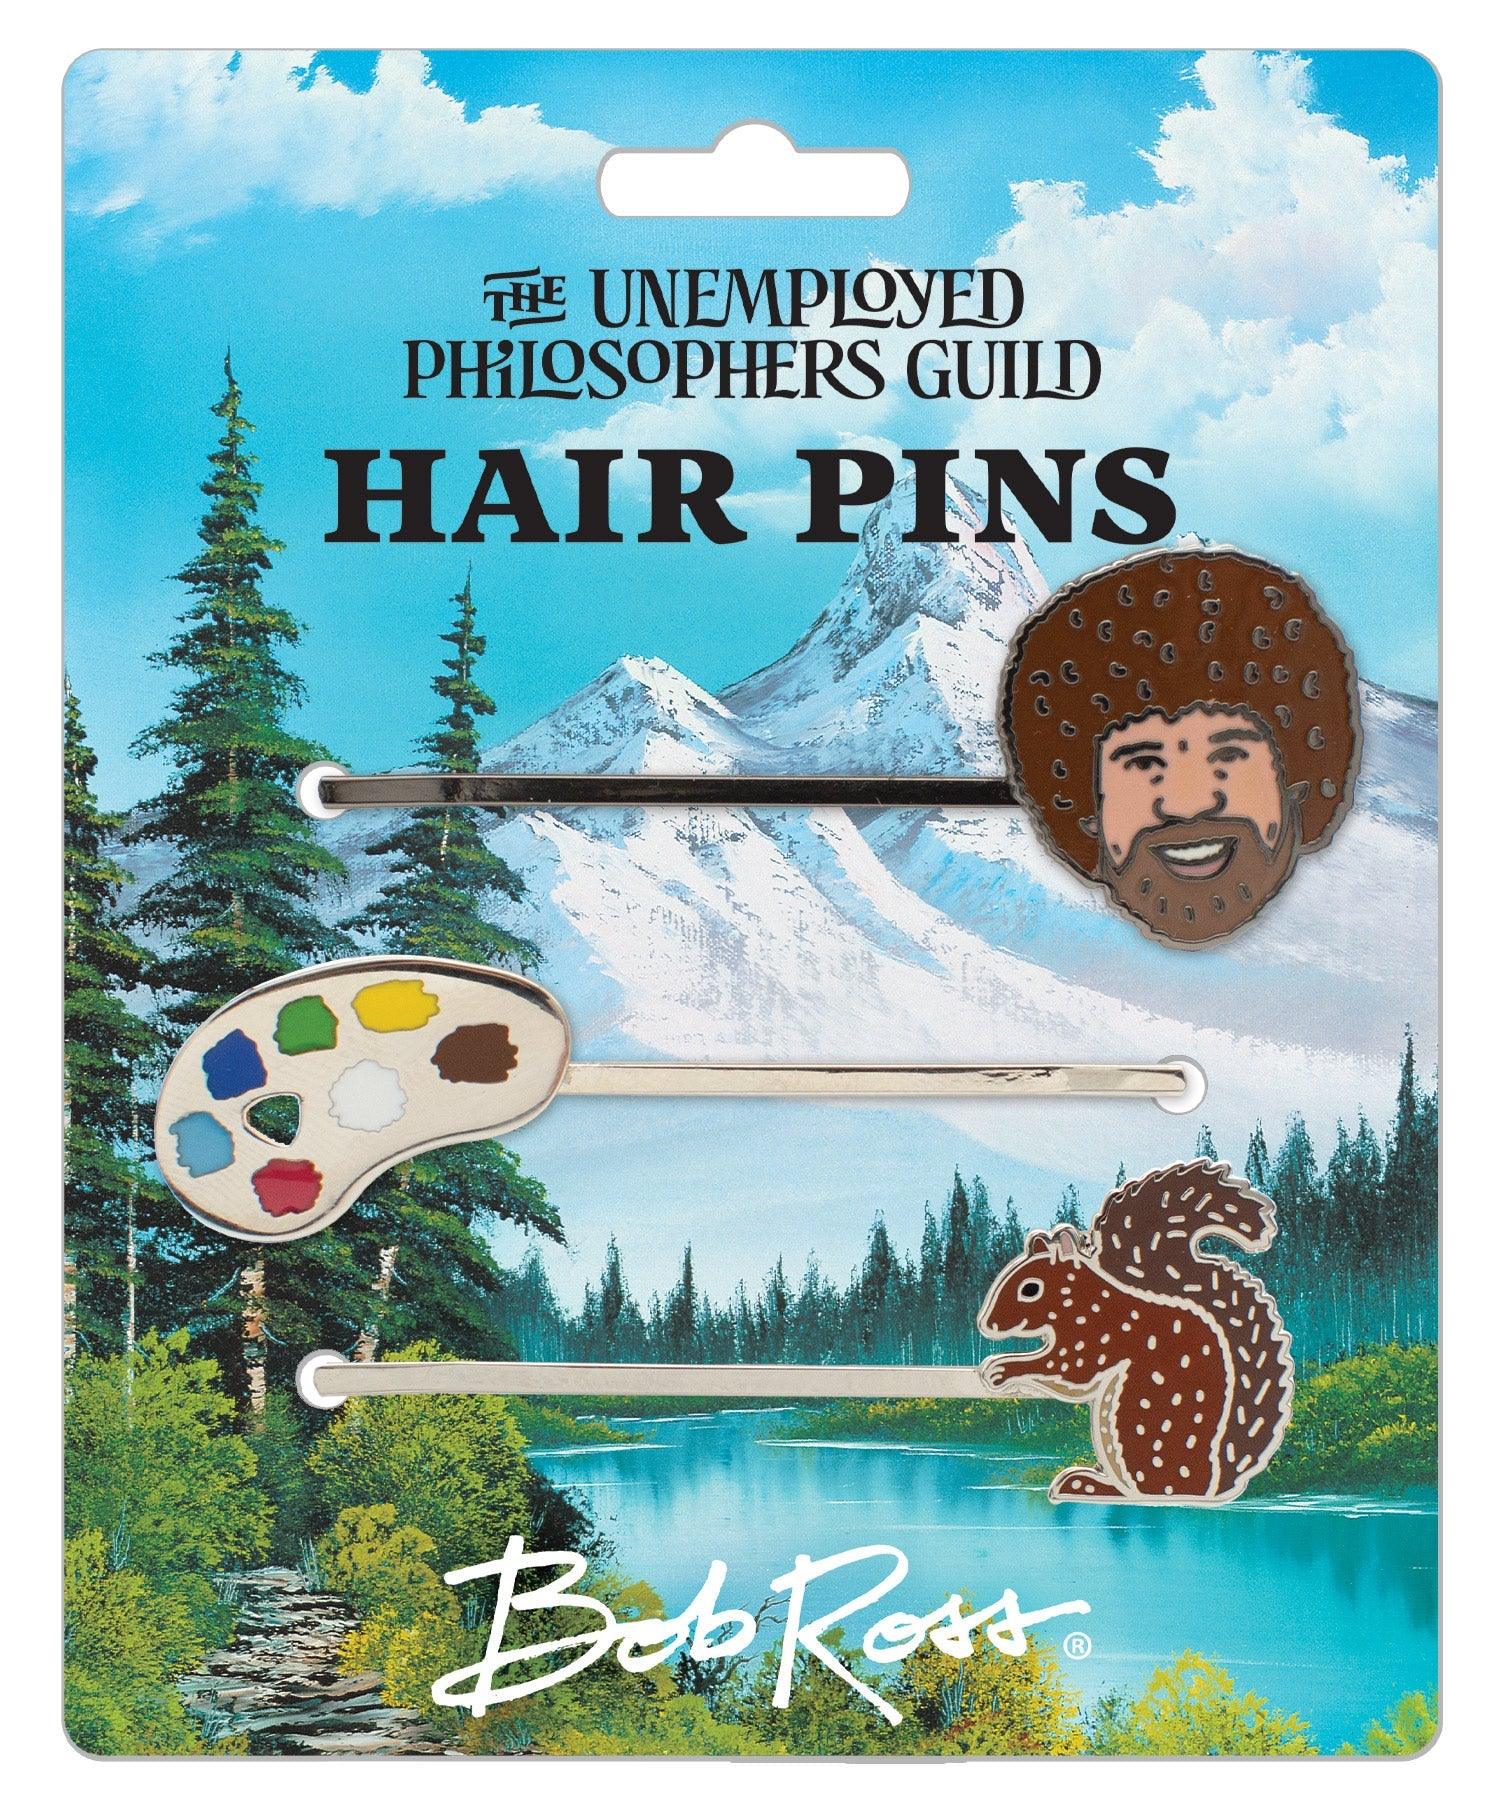 Bob Ross Hair Pins – The Unemployed Philosophers Guild